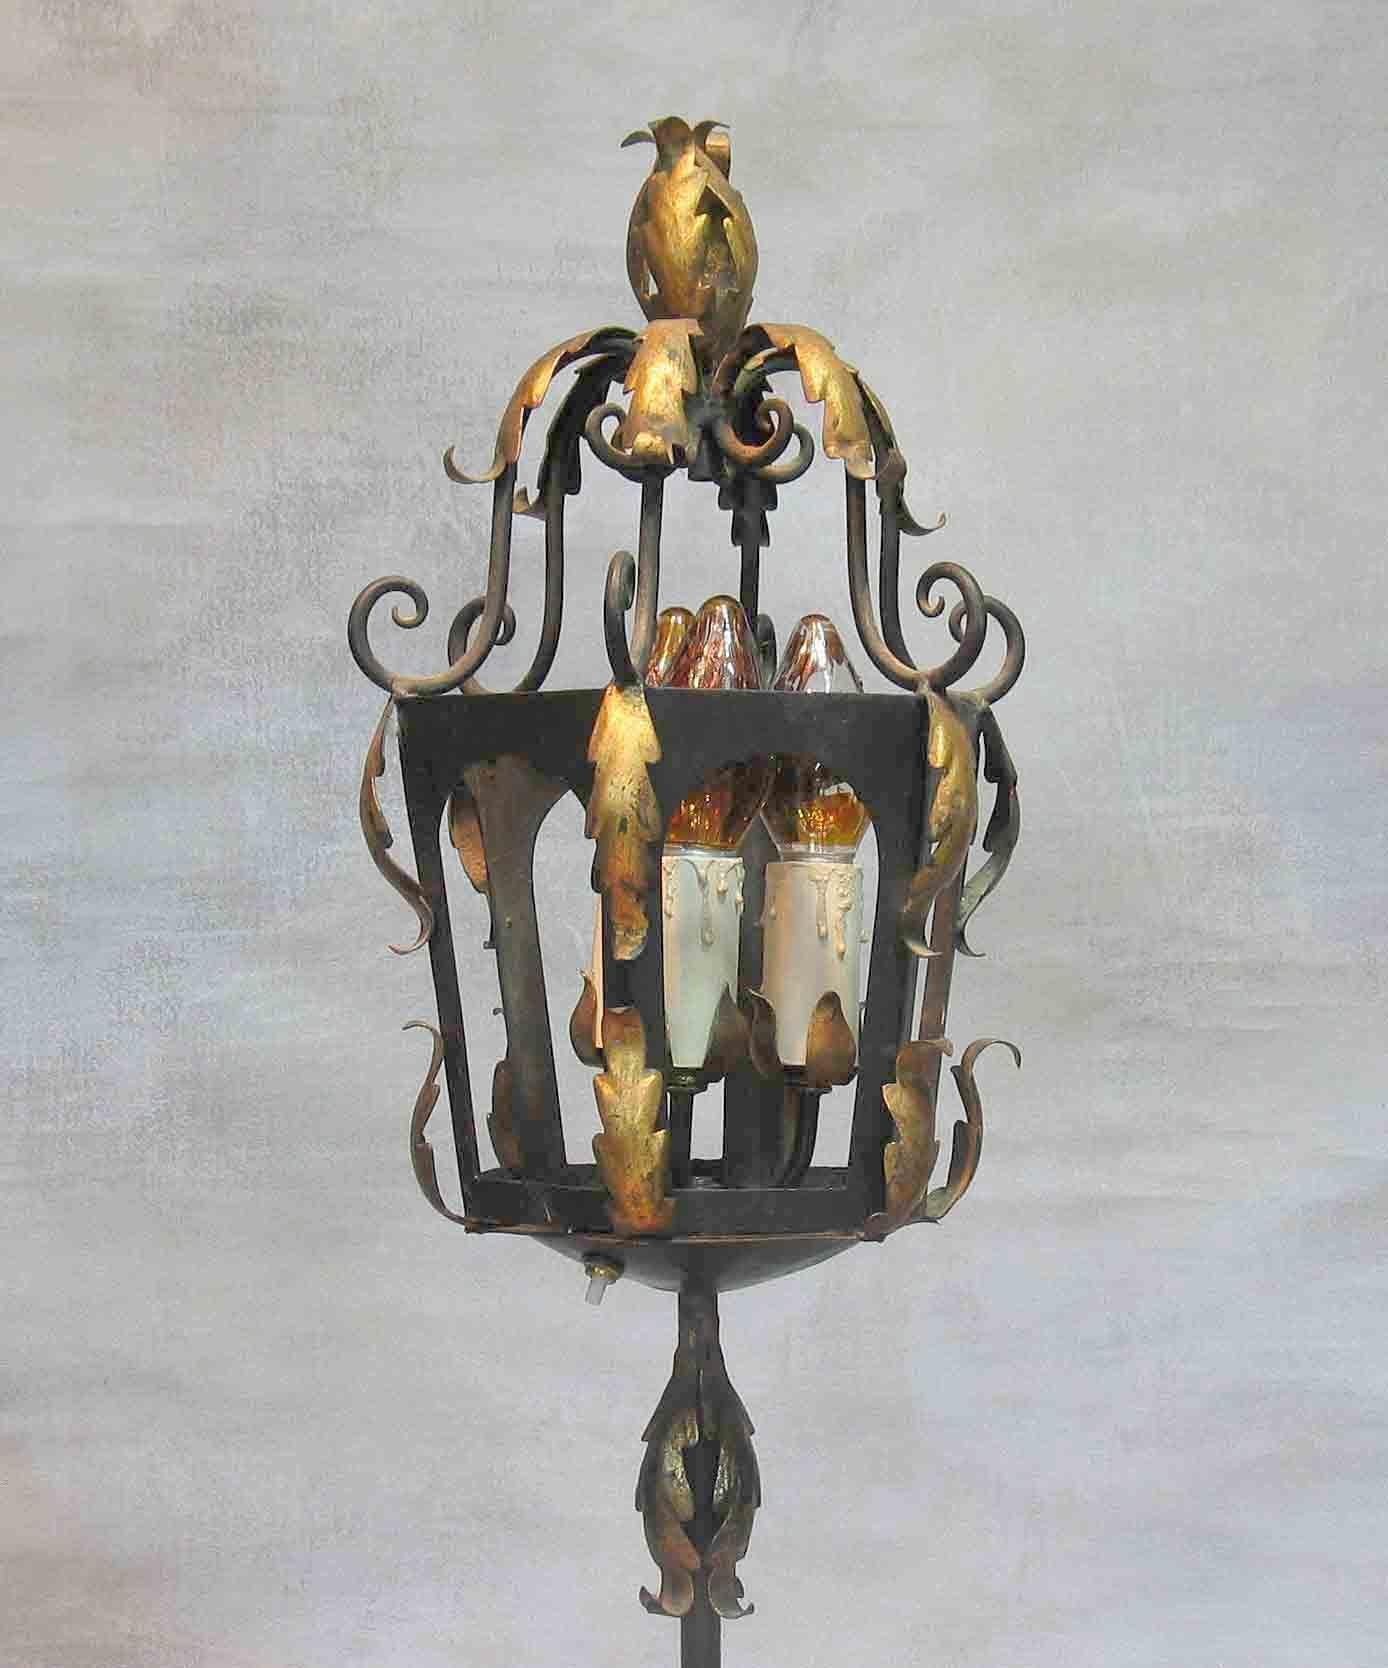 A Venetian style tole and wrought iron lantern floor lamp,
circa 1930.

Gilt and black painted tole and wrought iron
lantern. Shaft set into a turned gilt wood baluster
raised on a iron tripod base.

Measures: 60